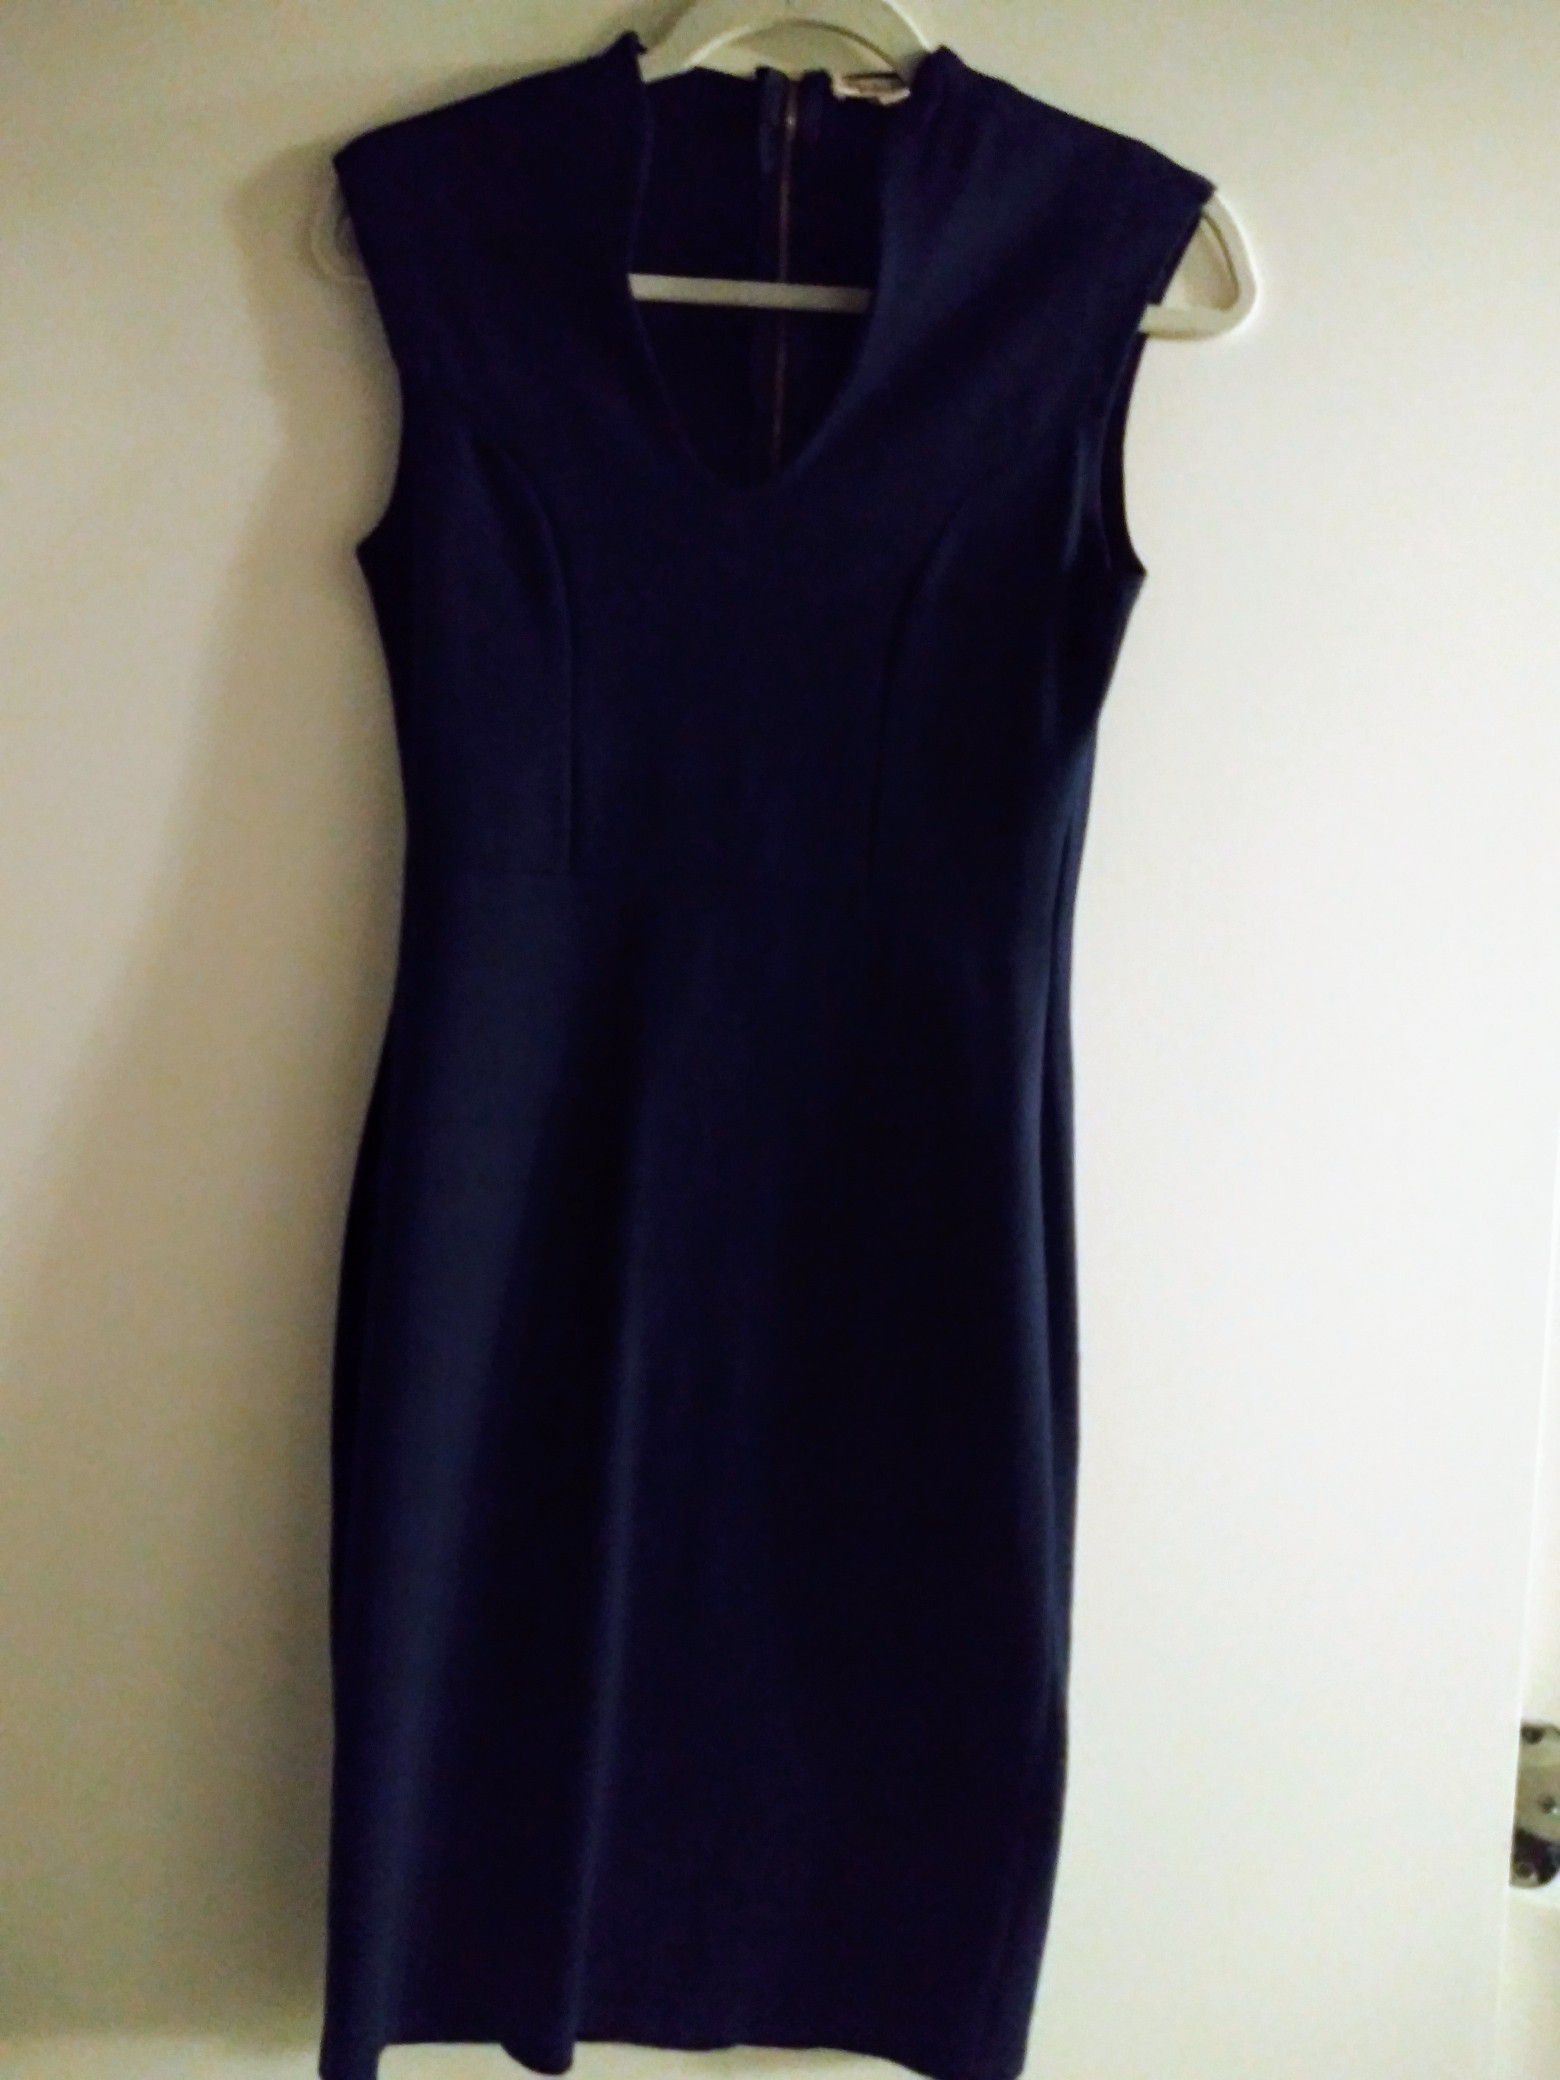 $15.00 Women's Fall/Winter ANY Occasion Navy Blue Dress SIZE Medium-Cotton/Spandex Blend. U Shaped Plunge Neckline, over the knee length. Zip Up Back